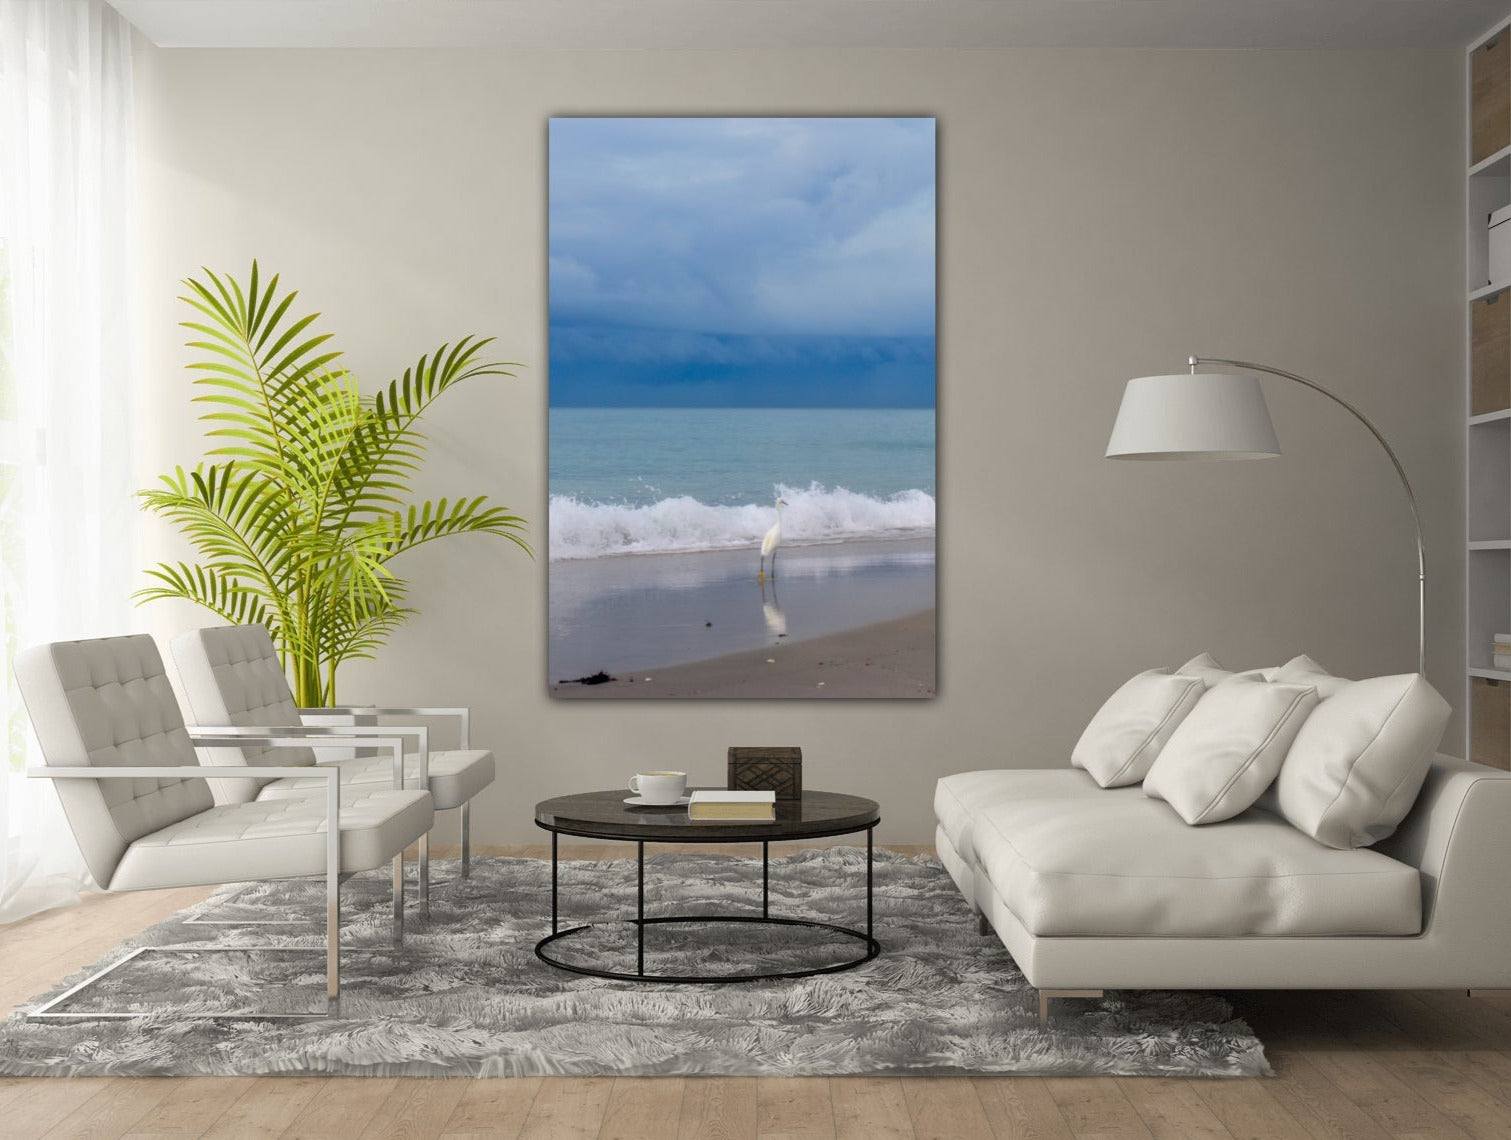 egret reflection at seaside canvas print home decor by Jacqueline MB designs 